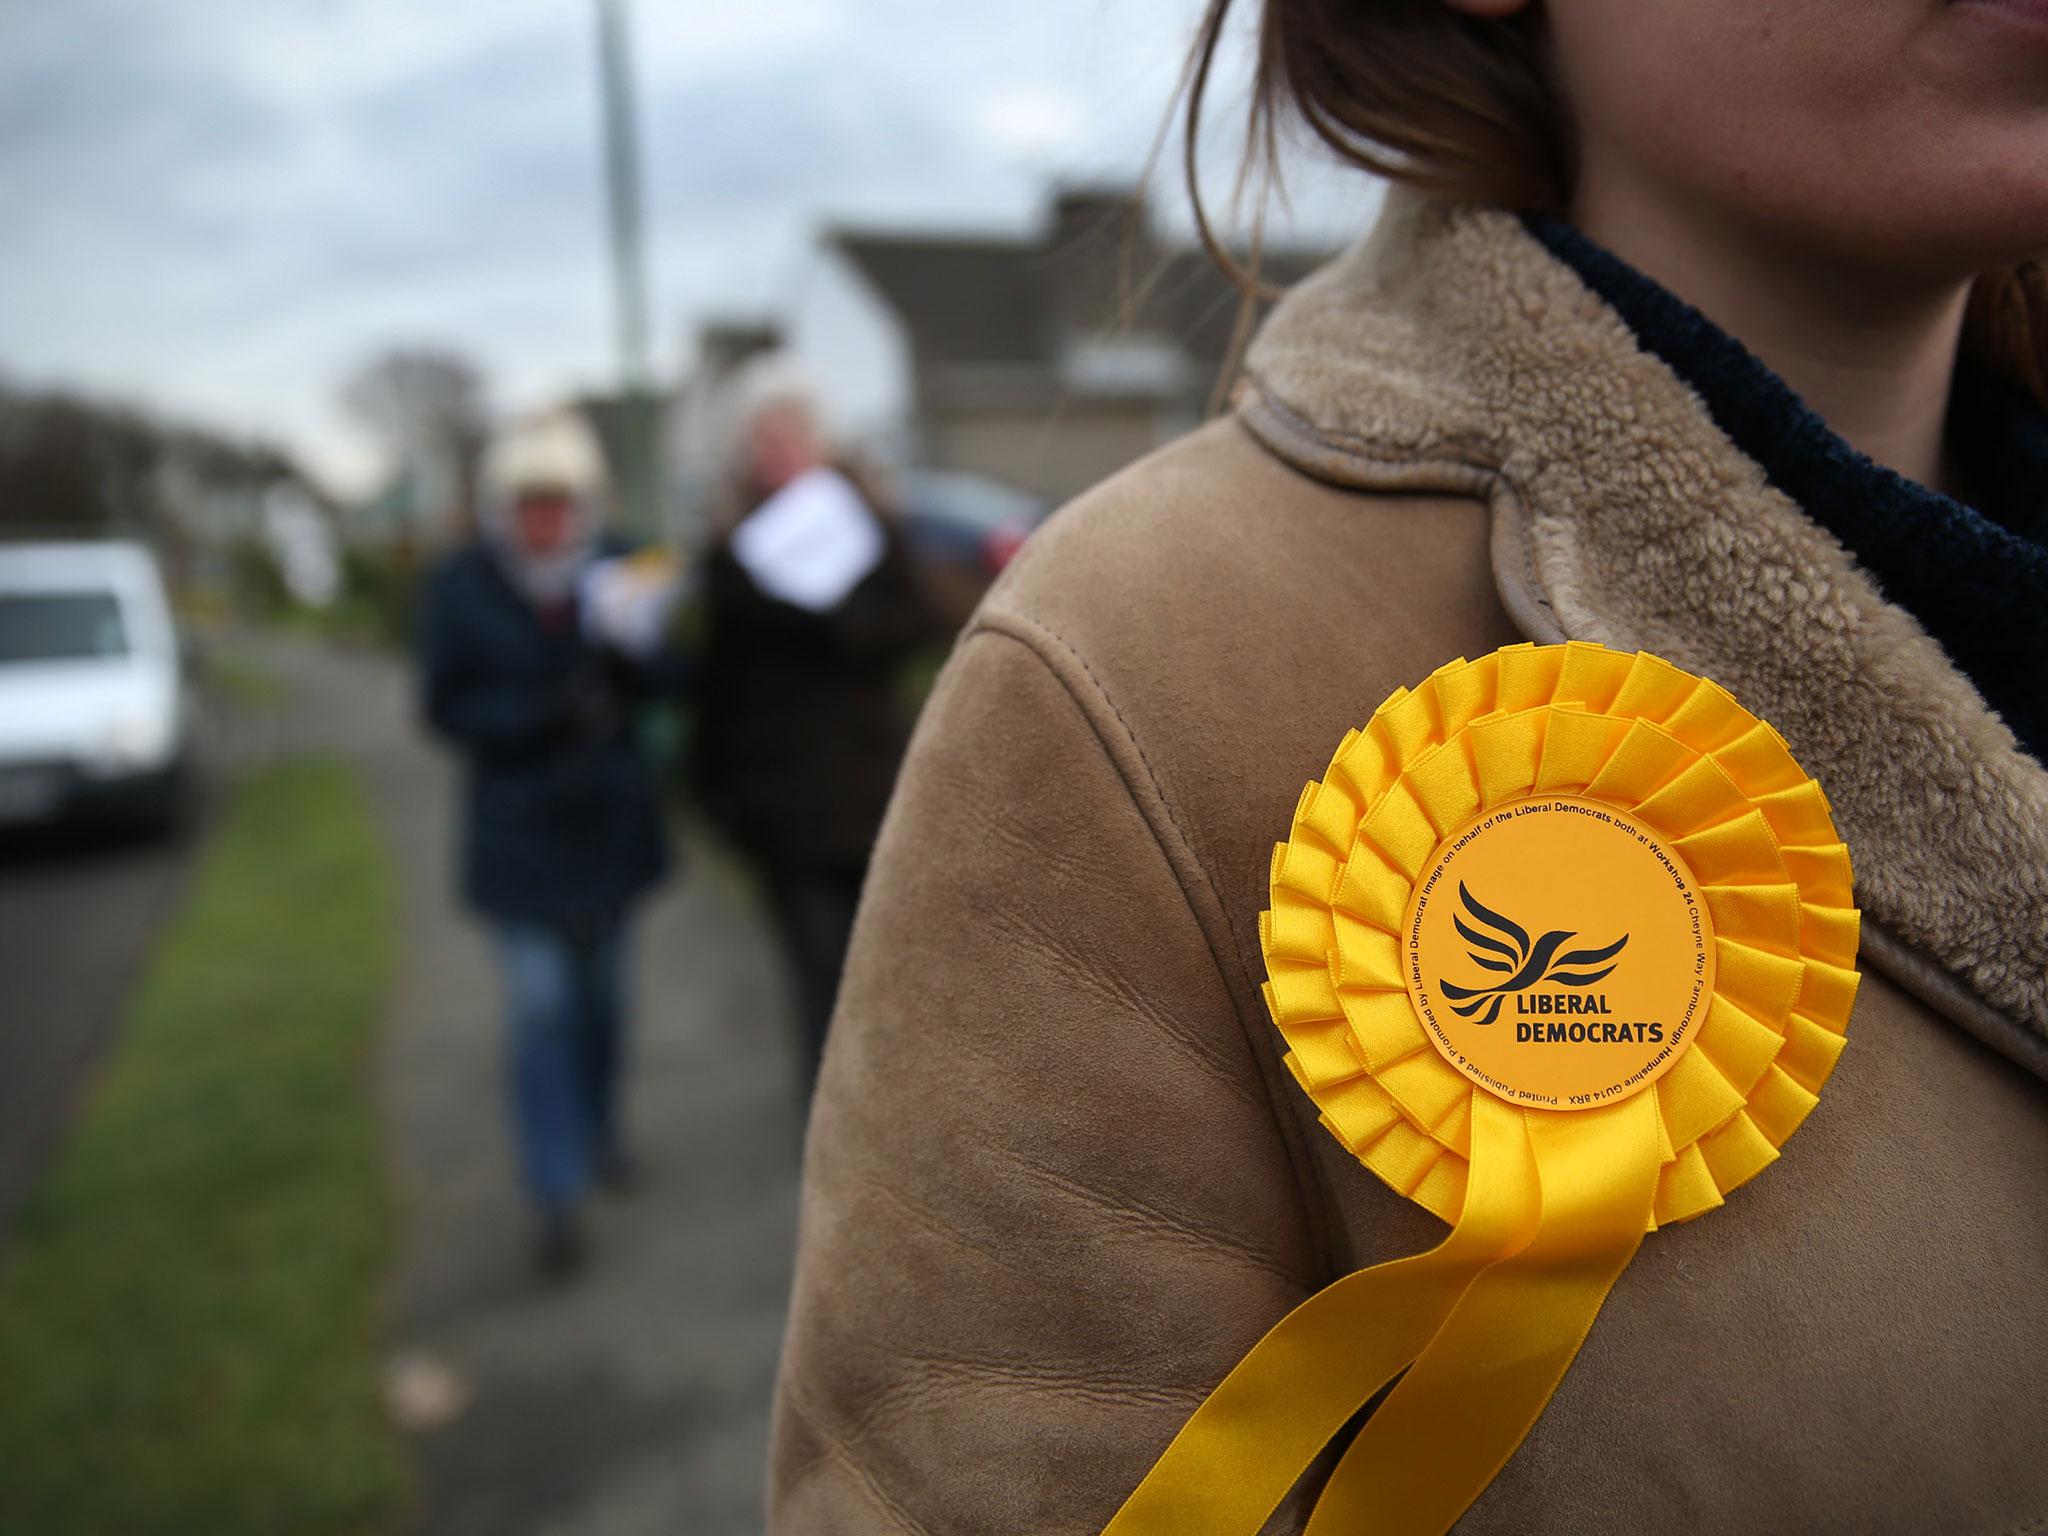 Since the Liberal Democrats were decimated at the general election, party membership numbers have increased from around 45,000 to 62,000